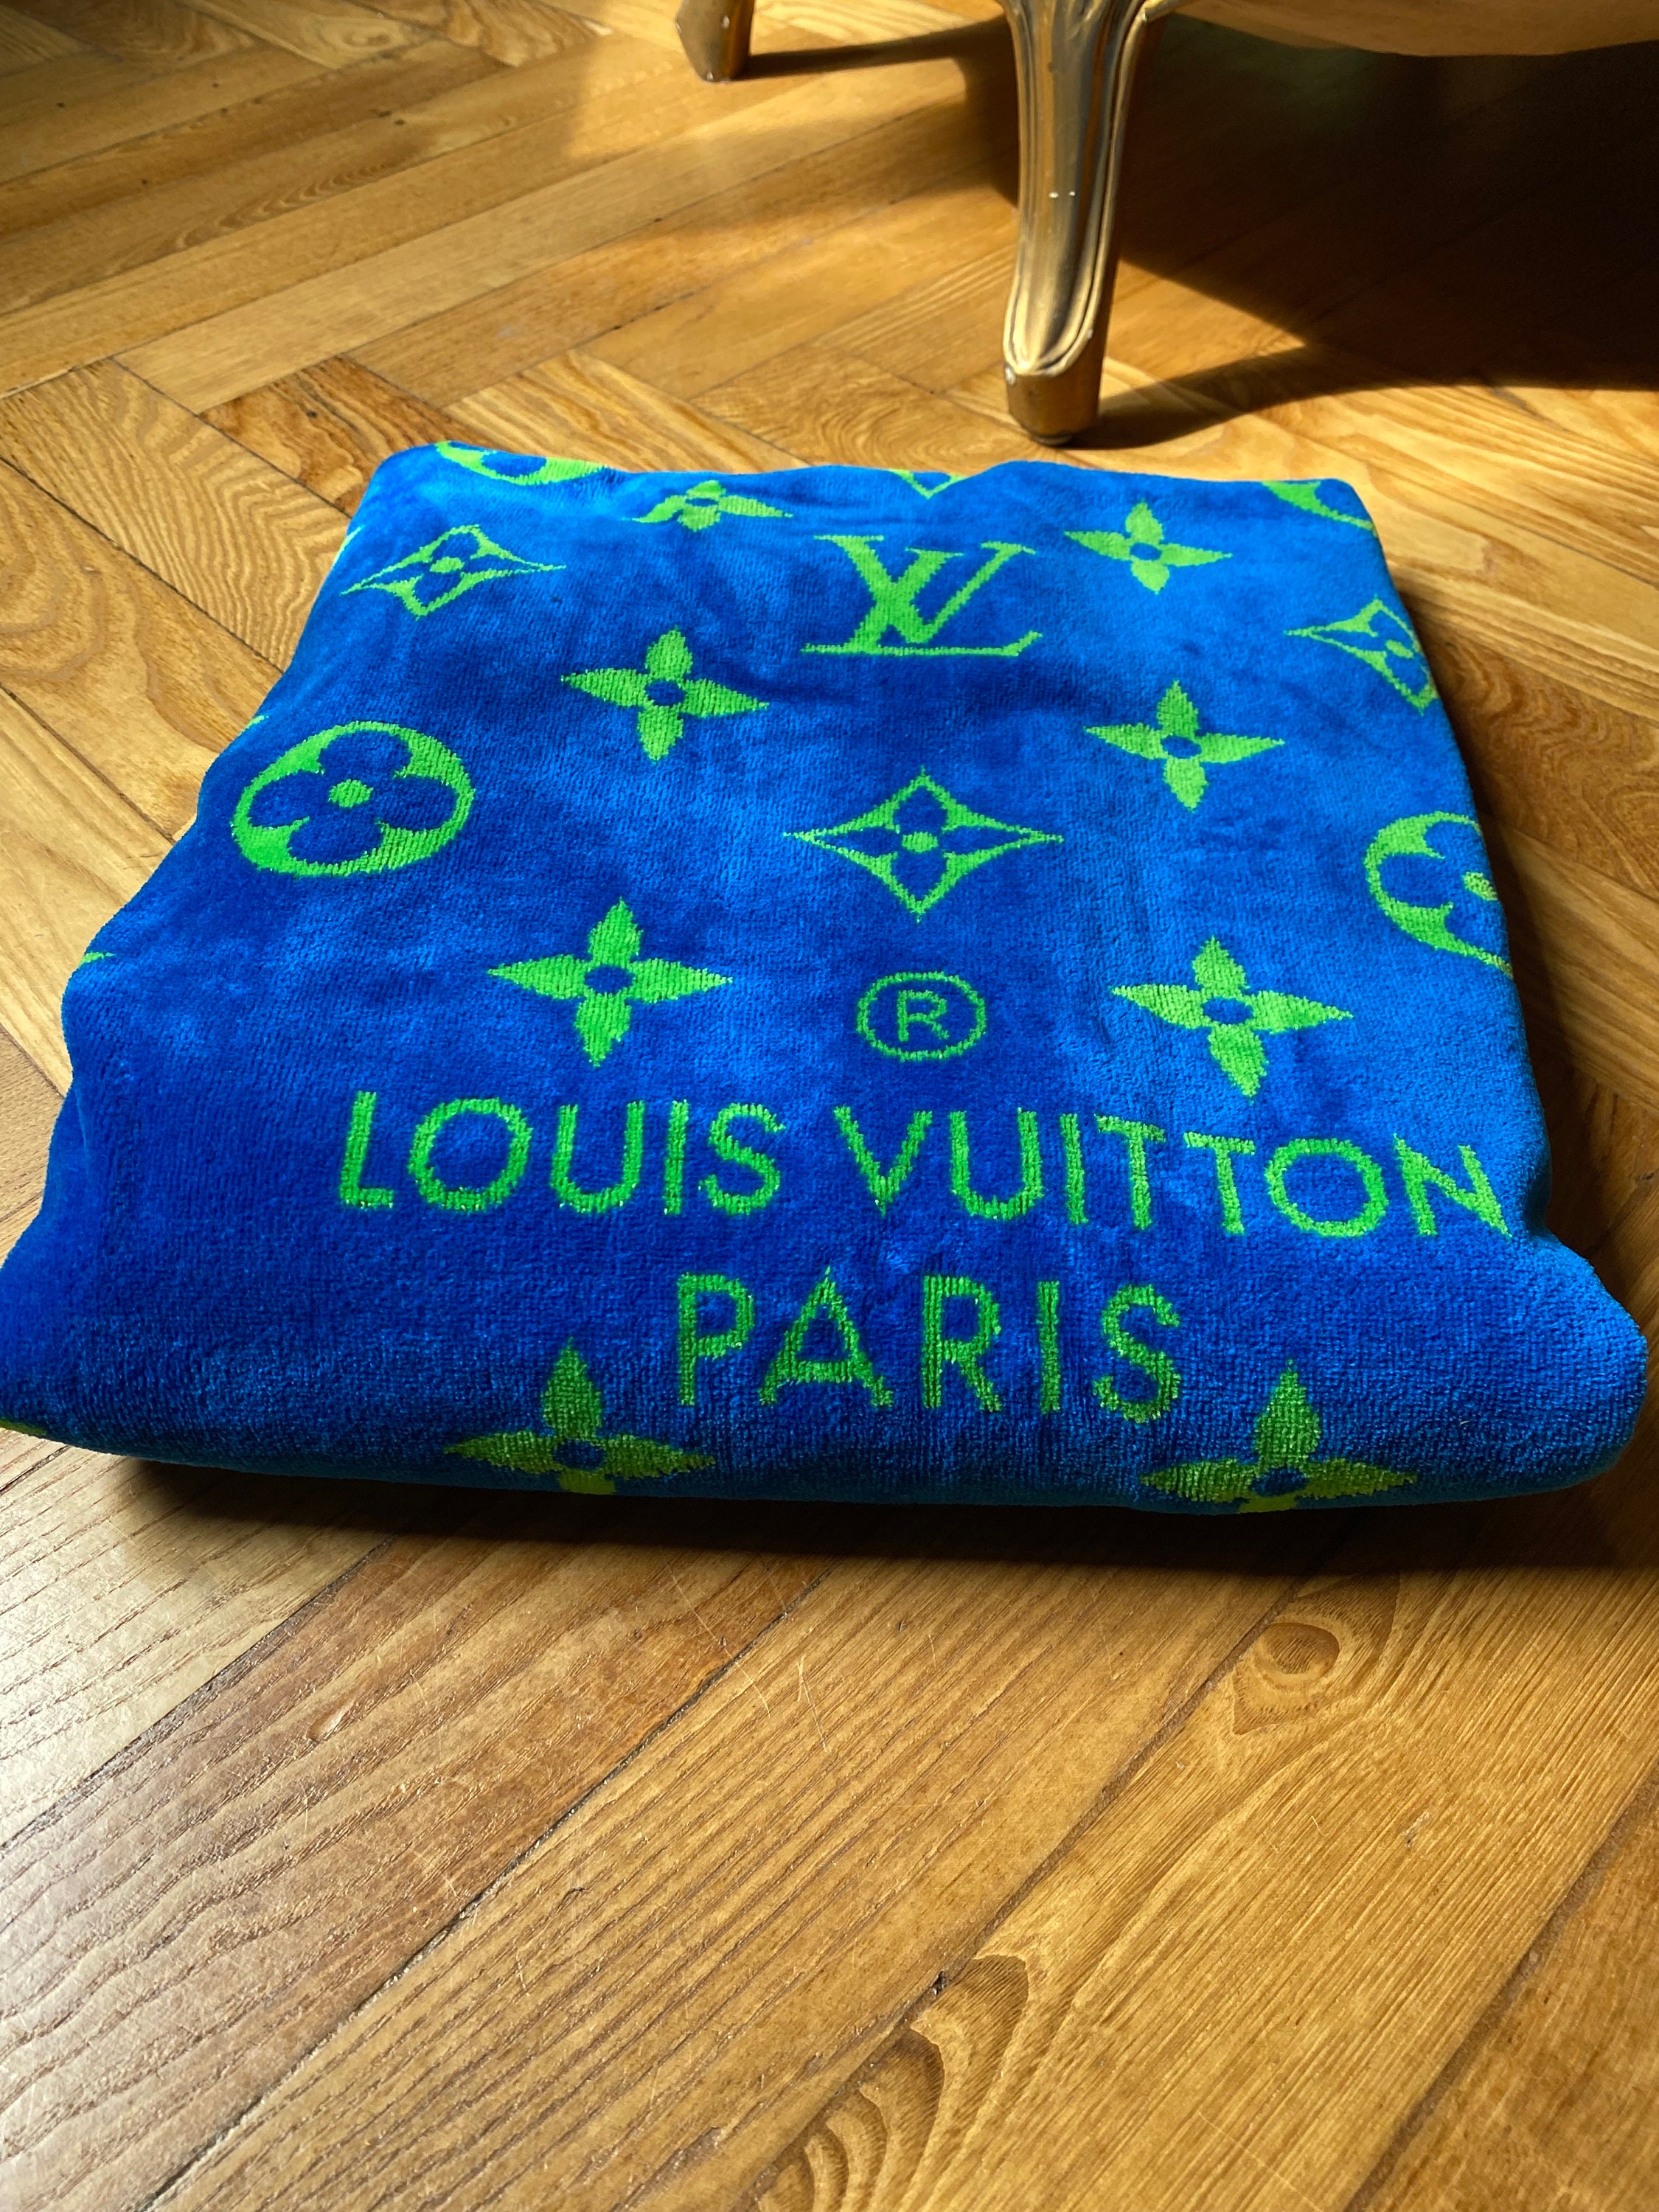 Custom Louis Vuitton beach towel house slippers👣👣 which pair is your  favorite ??? Dm to order !